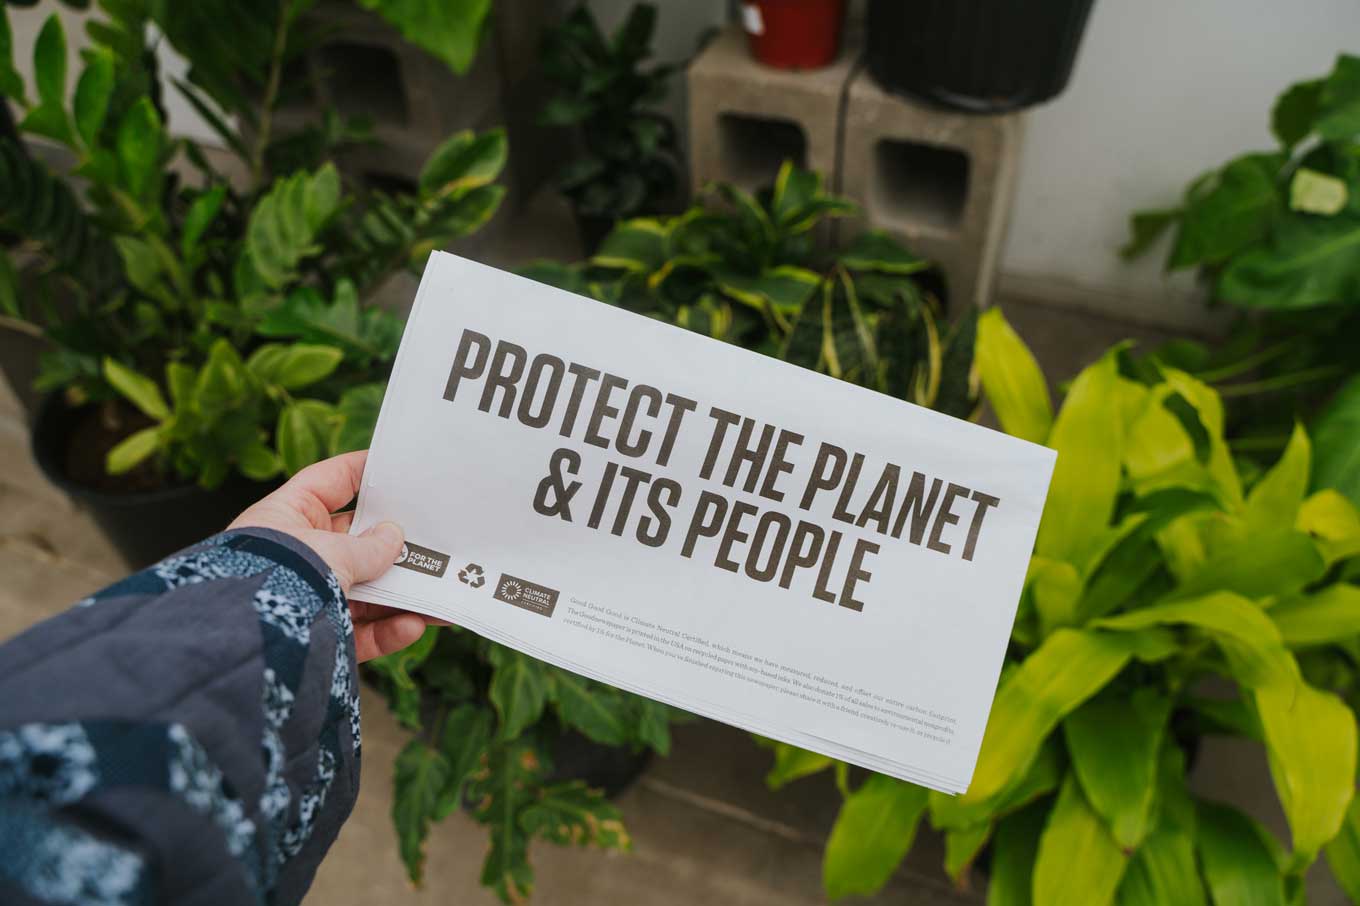 Goodnewspaper reads: Protect the Planet & Its People - with logos for 1% for the Planet and Climate Neutral